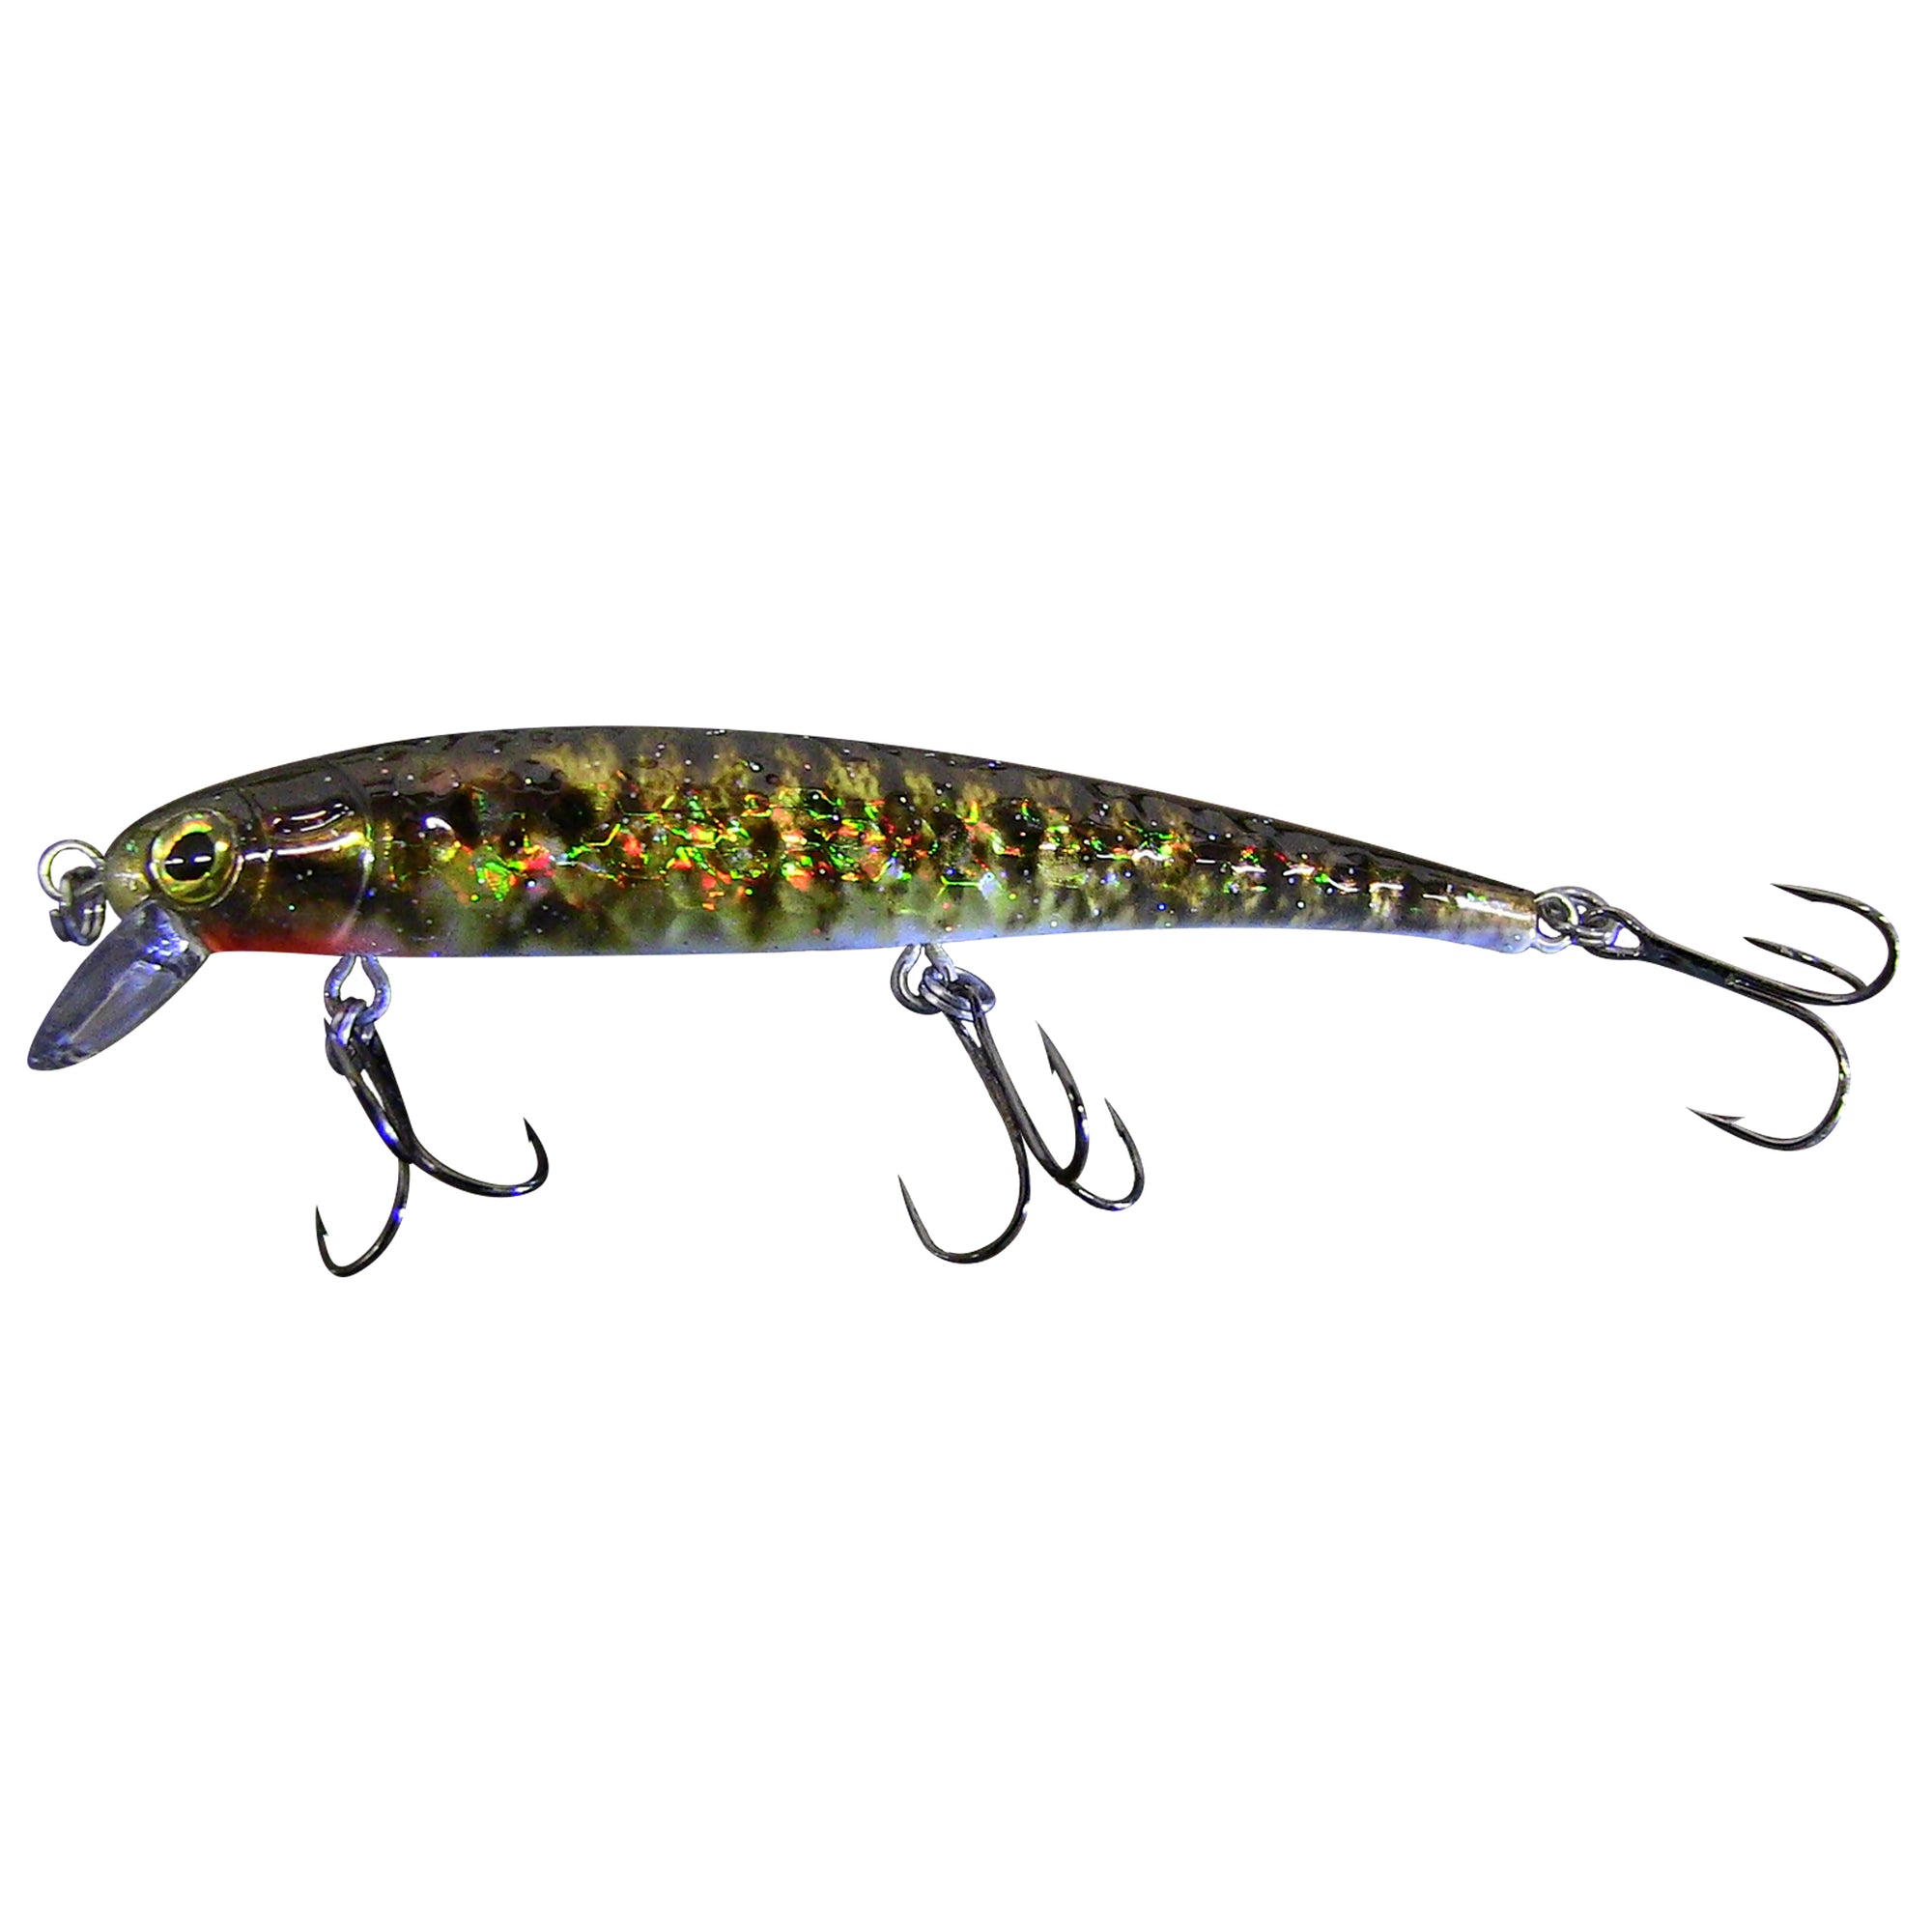 Small Mouth Bass Shallow Diver Live Bait Series